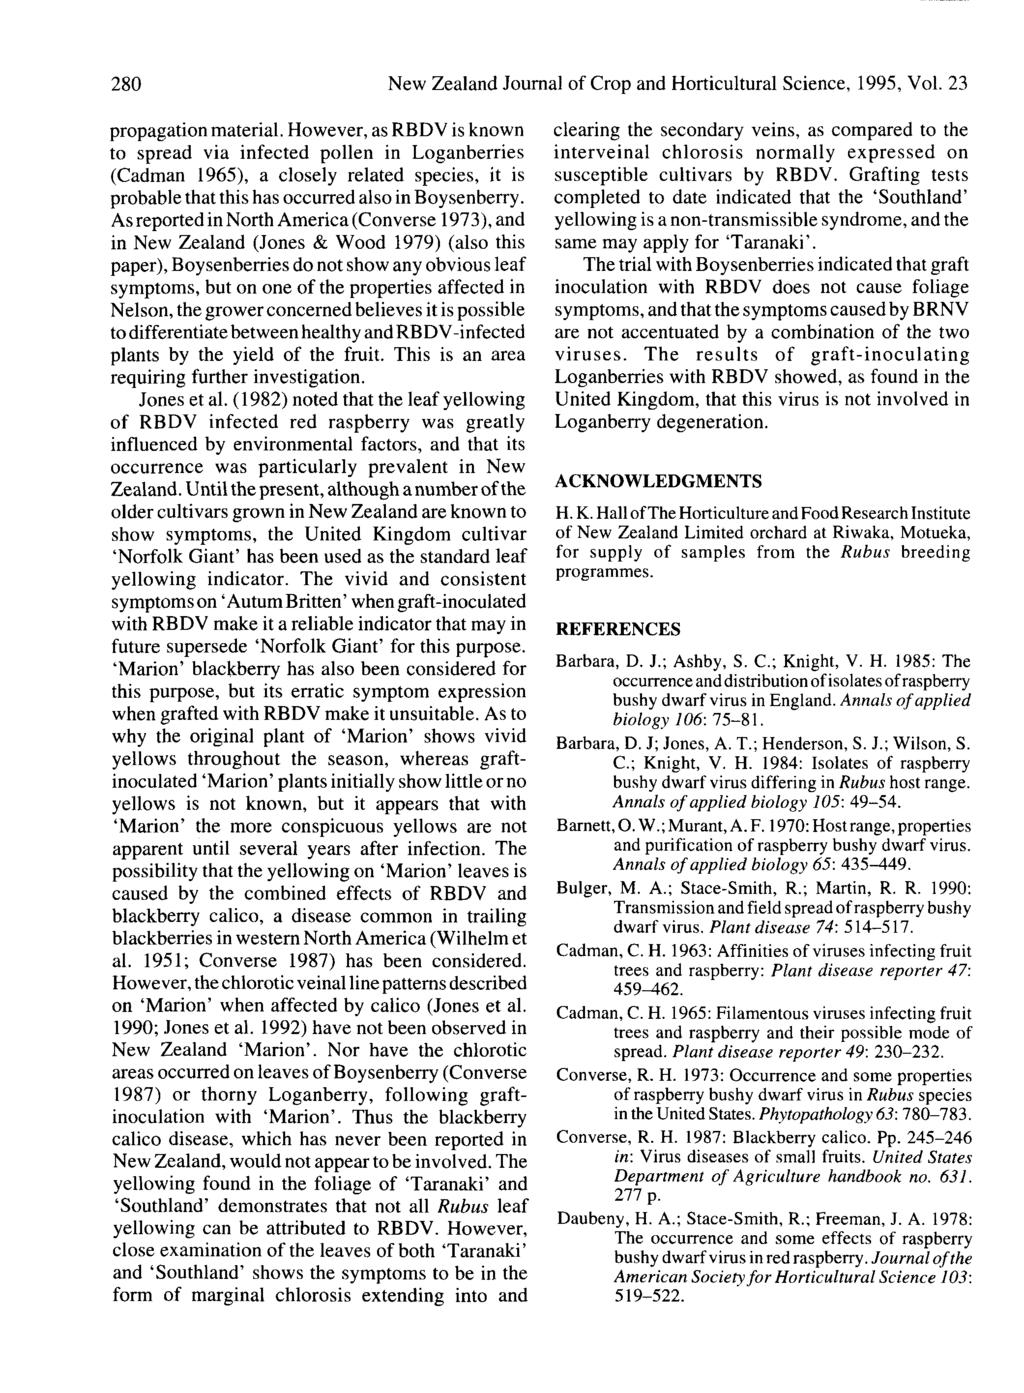 28 New Zealand Journal of Crop and Horticultural Science, 1995, Vol. 23 propagation material.